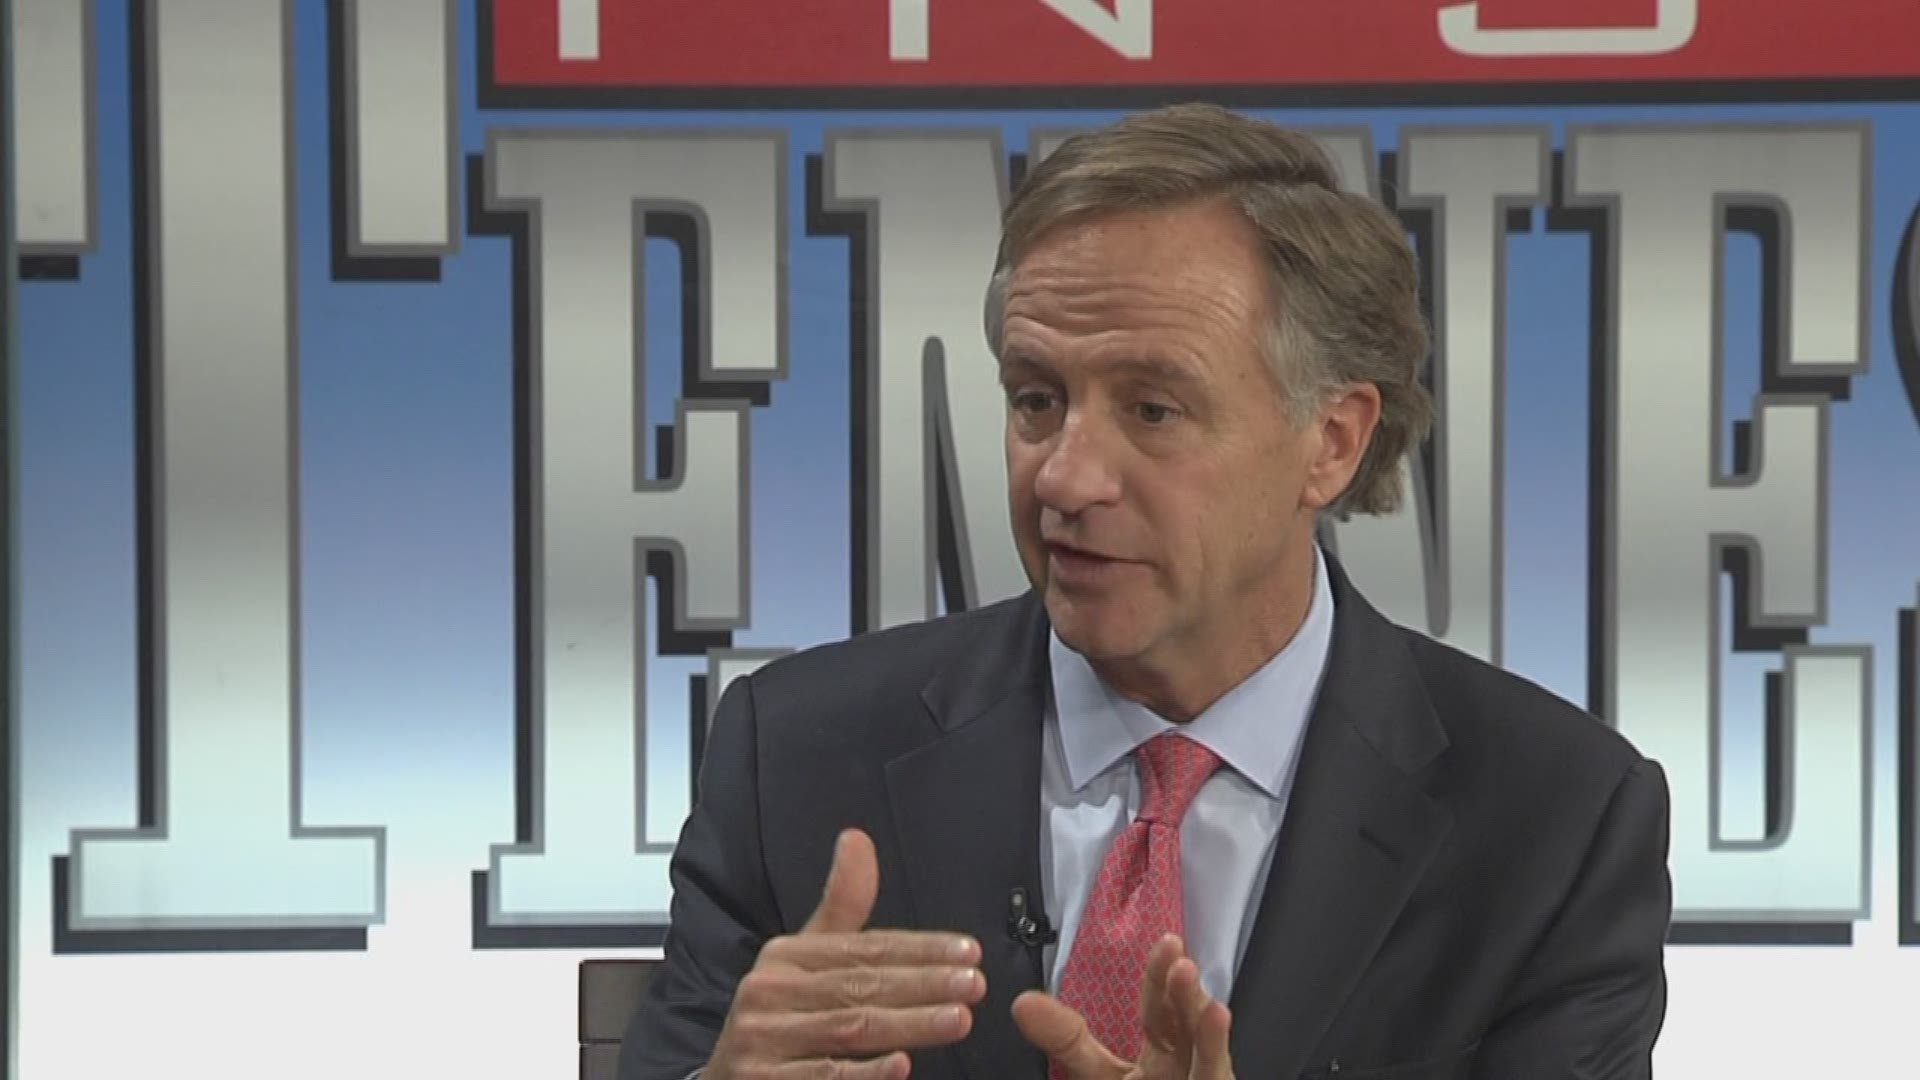 Gov. Bill Haslam talks about state issues including the budget and proposed legislation.